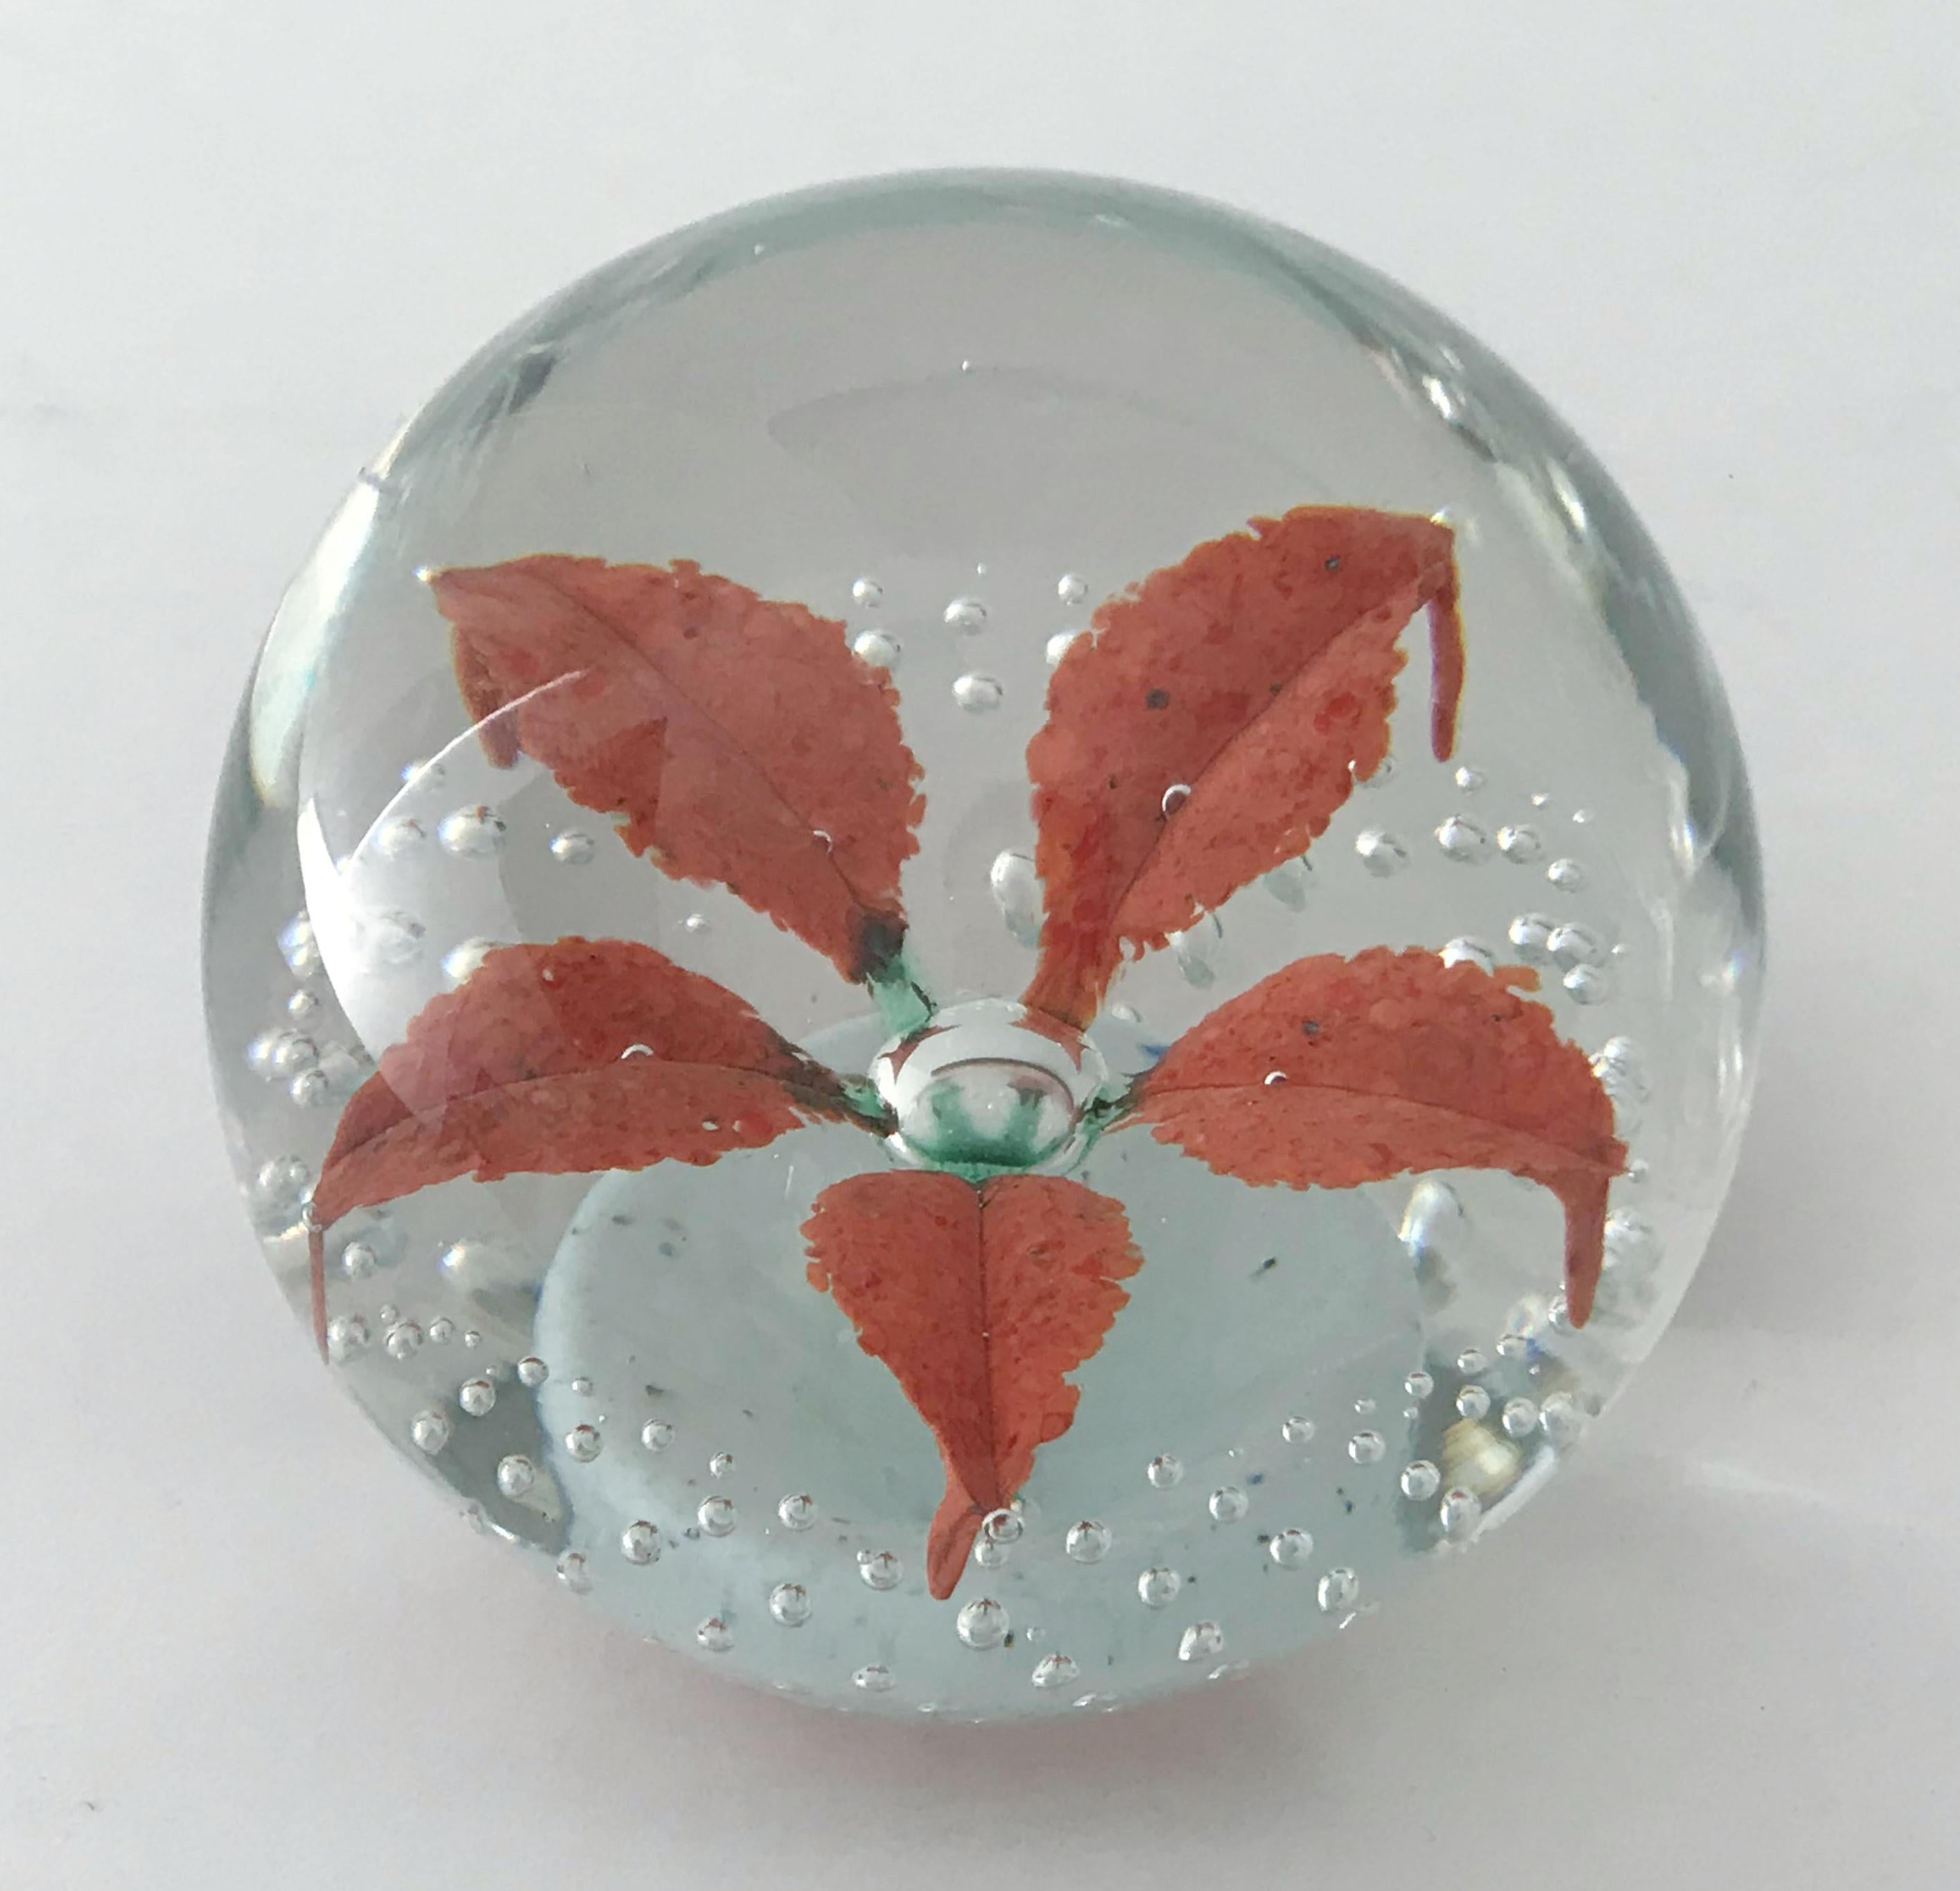 Vintage art glass paperweight with a large hand blown flower with bubbles, made in USA in 1977
Original mark on the base
Measures: Diameter 3 inches, height 3 inches
1 in stock in Palm Springs ON 50% OFF SALE for $149 !
Order reference #: FABIOLTD